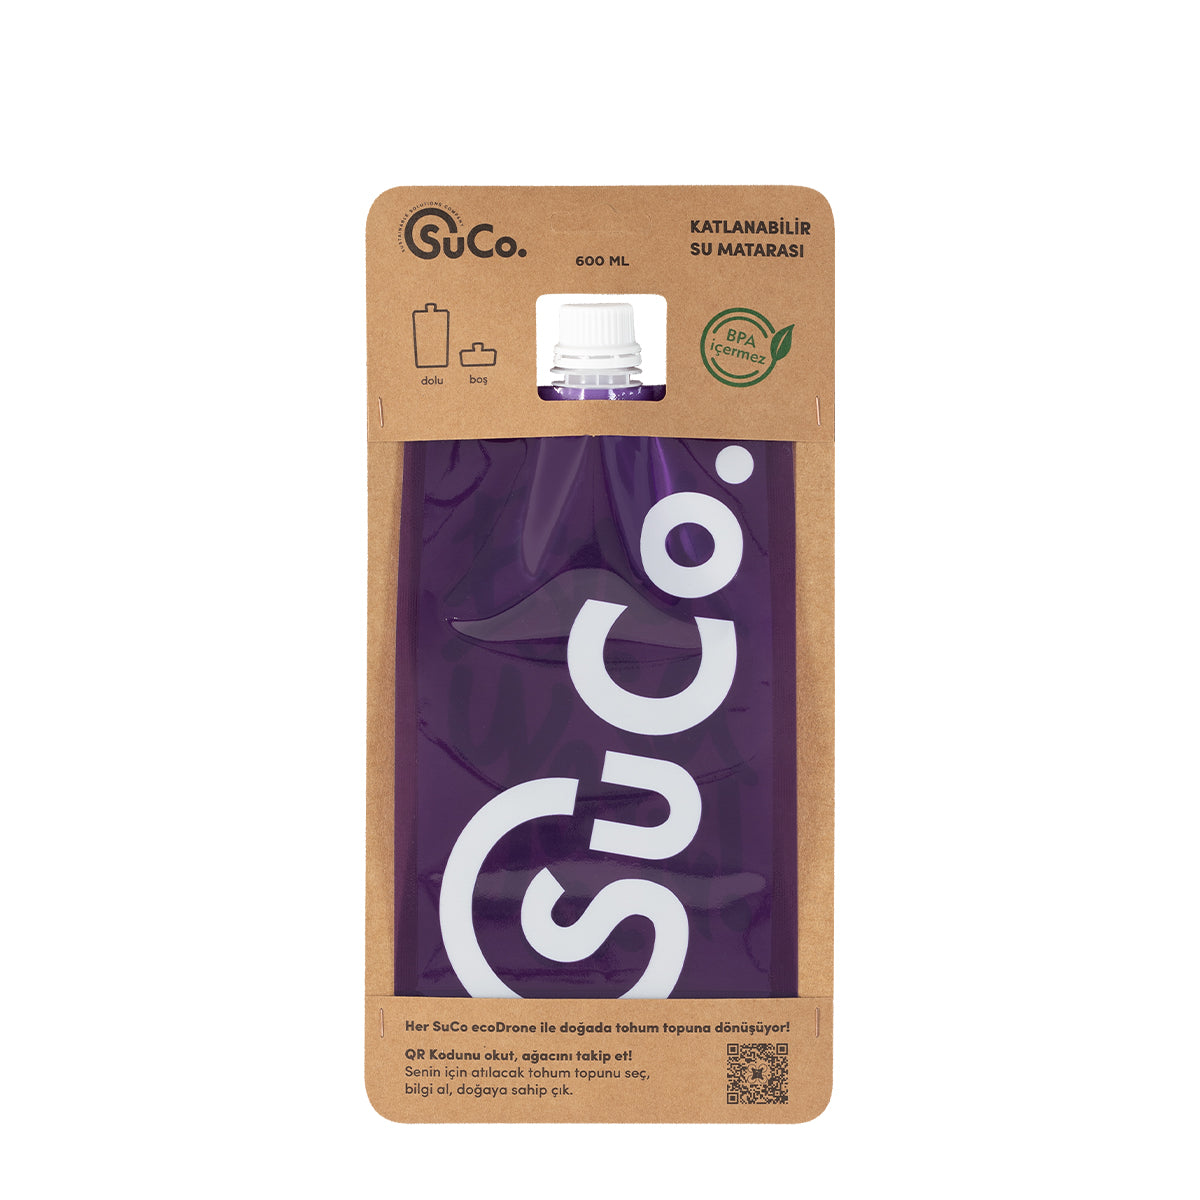 Water SuCo 2.0 - 600 ml